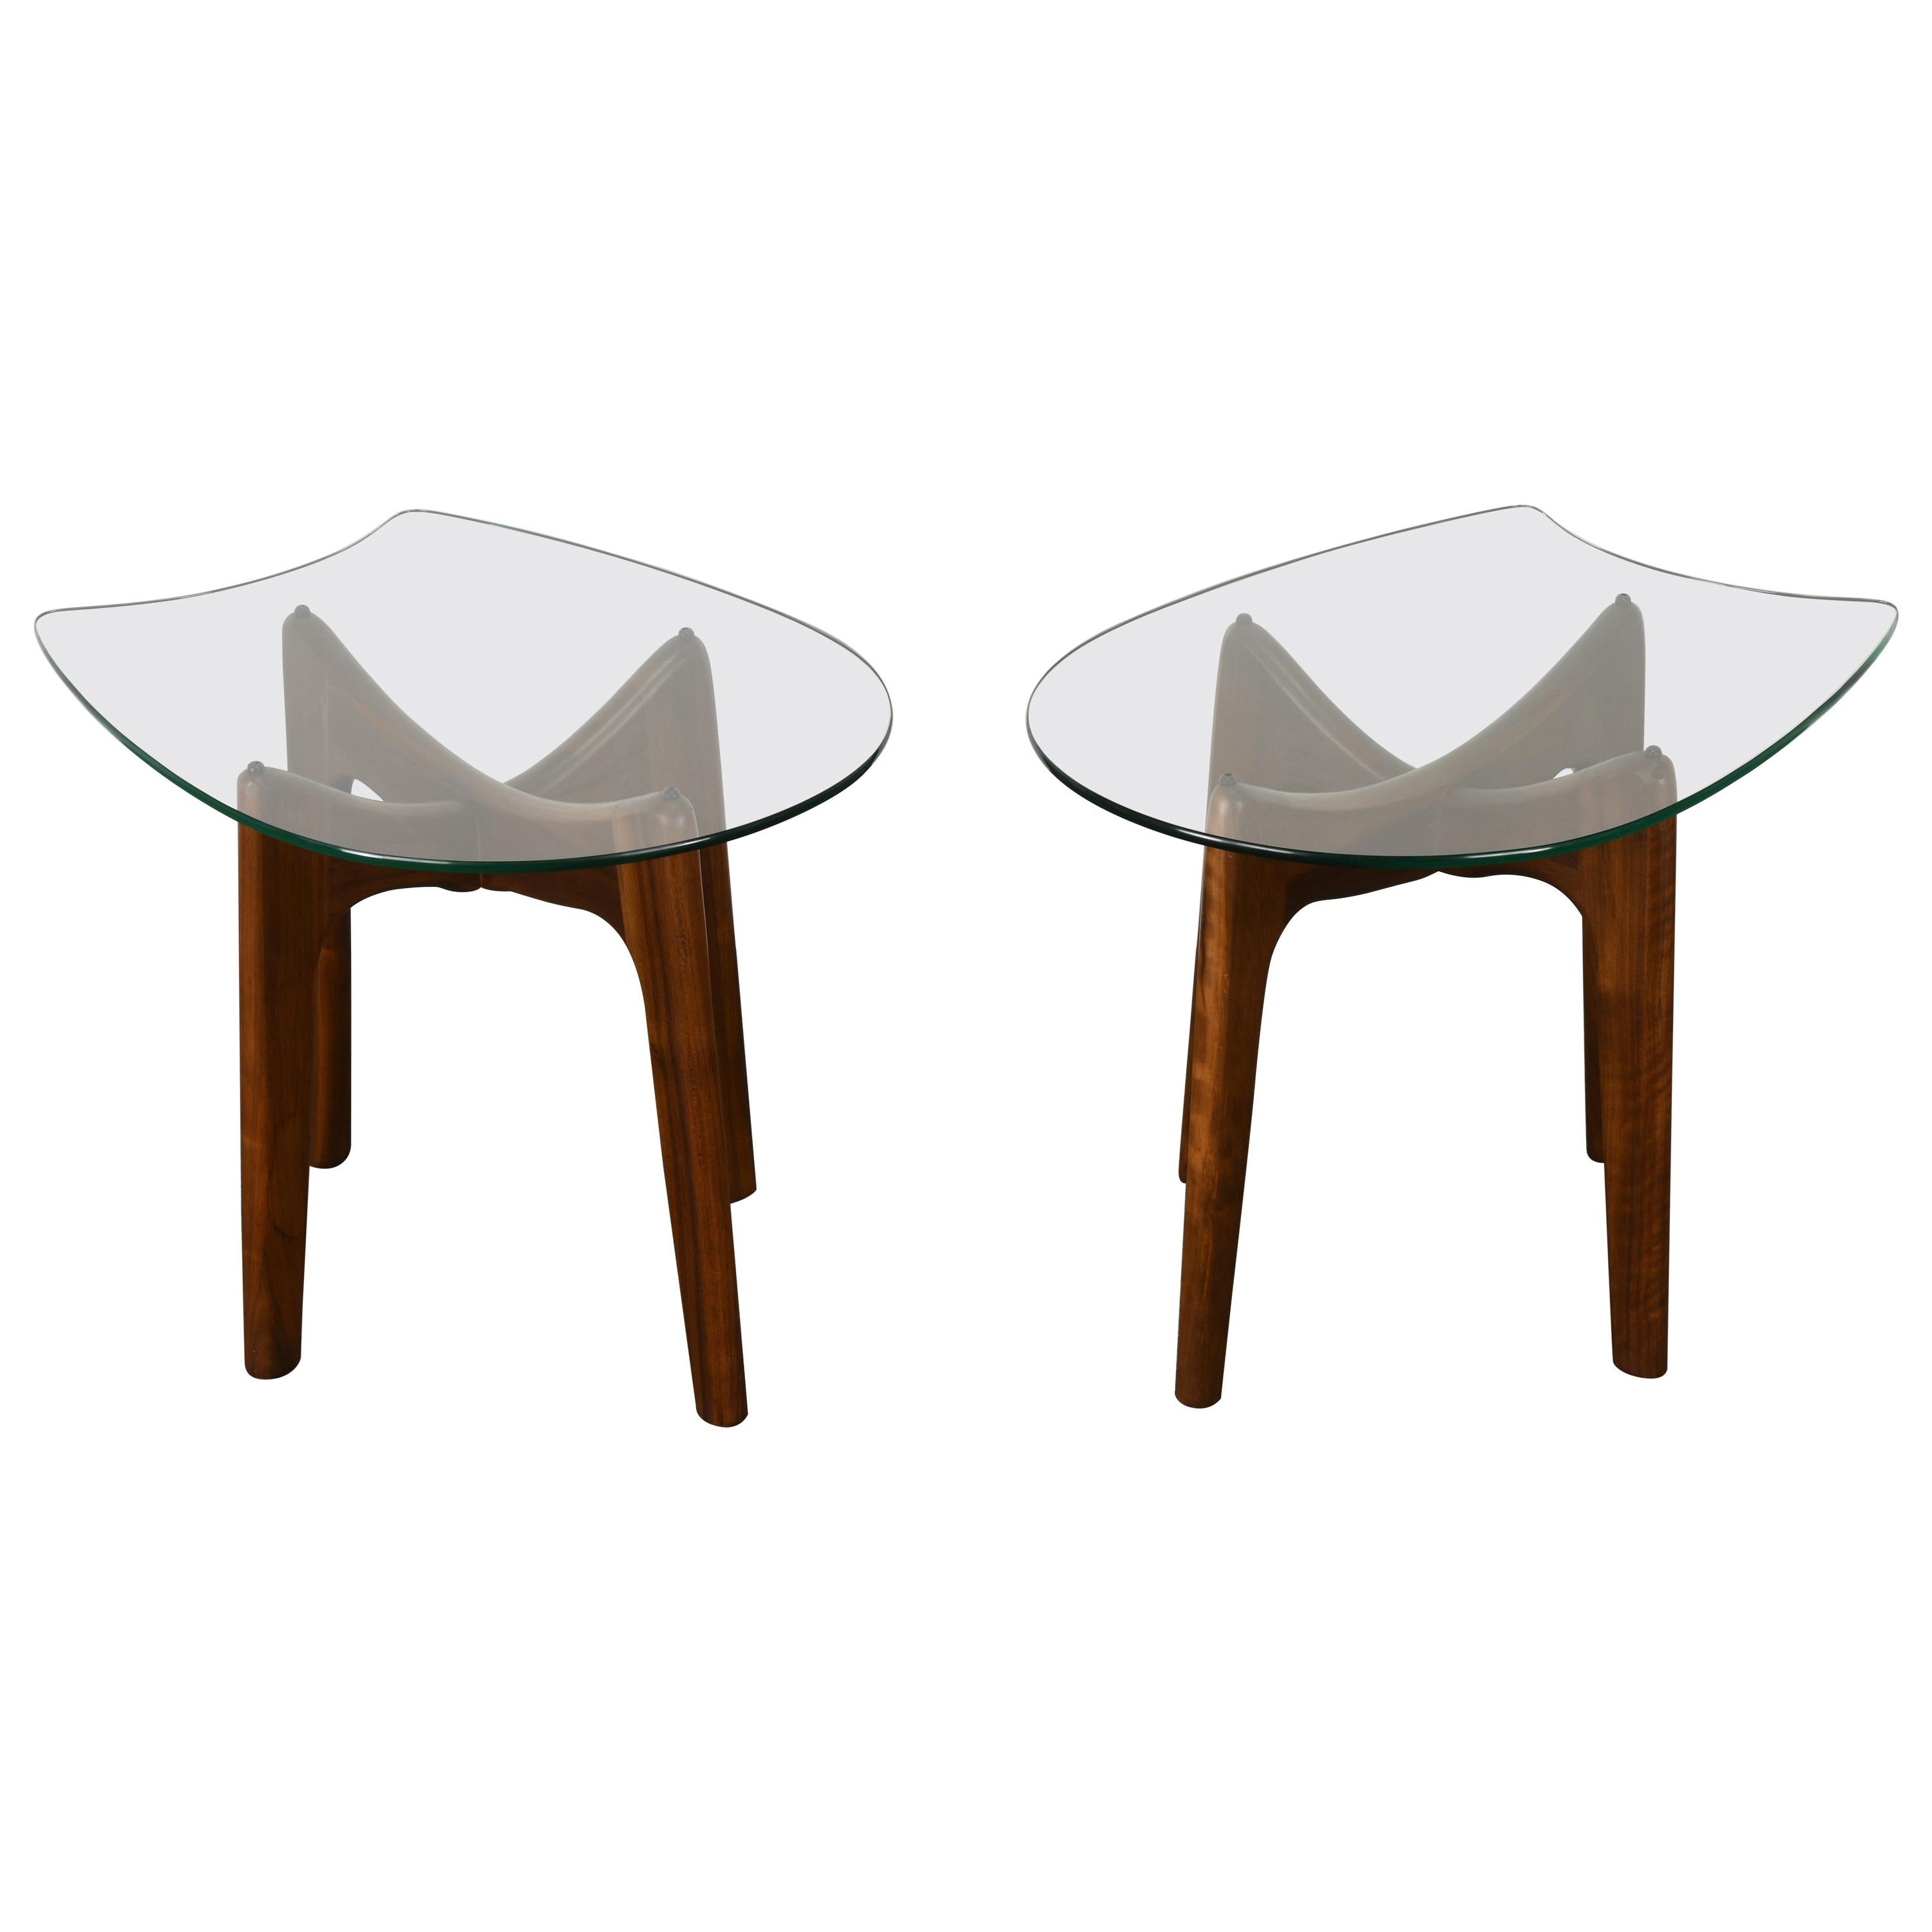 Pair of "Stingray" End Tables by Adrian Pearsall, 1960s